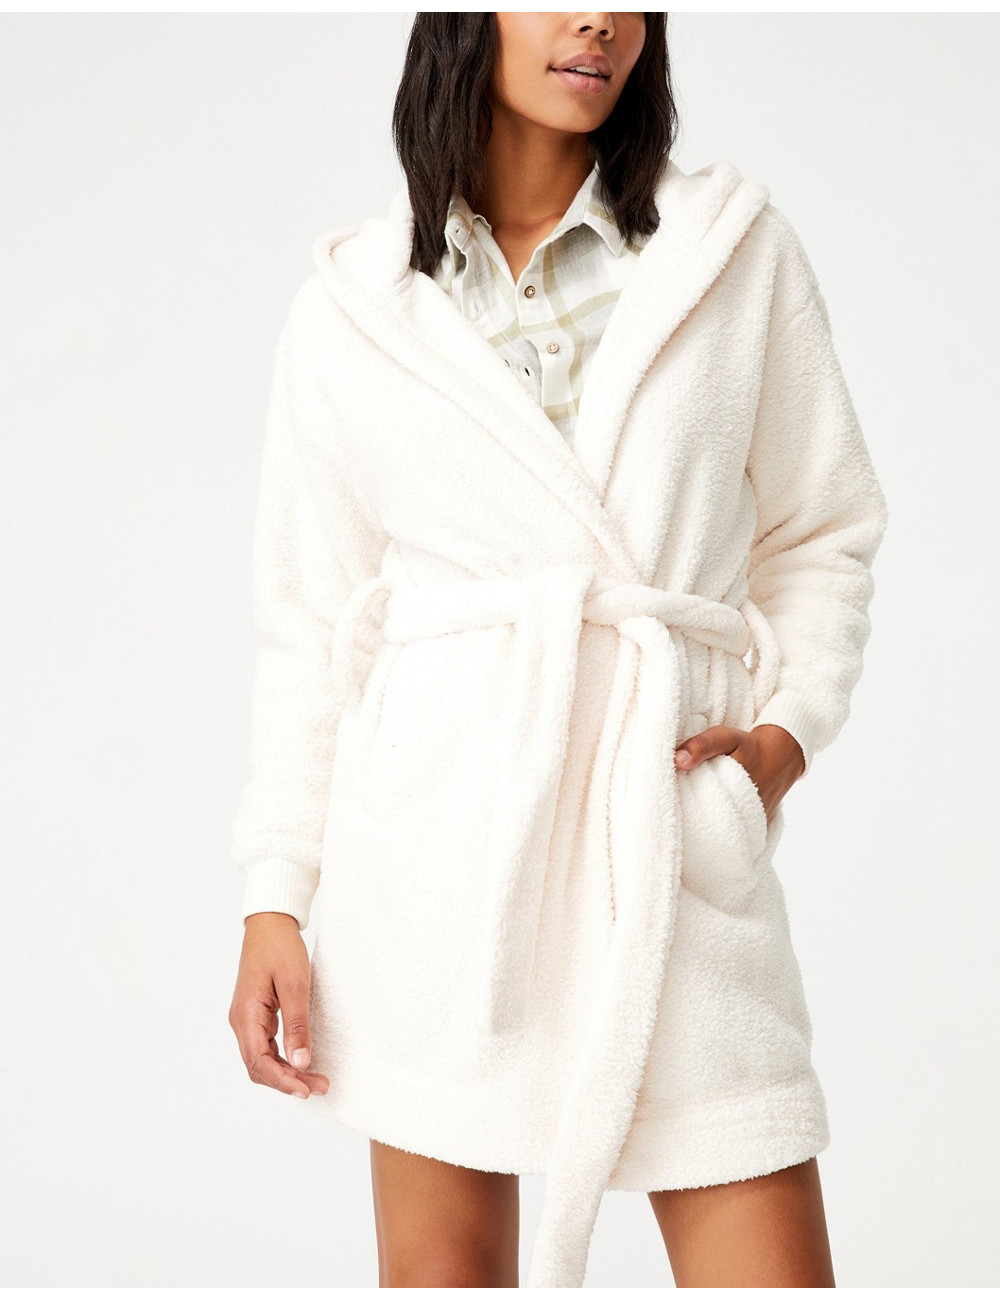 Cotton:On hooded robe in beige